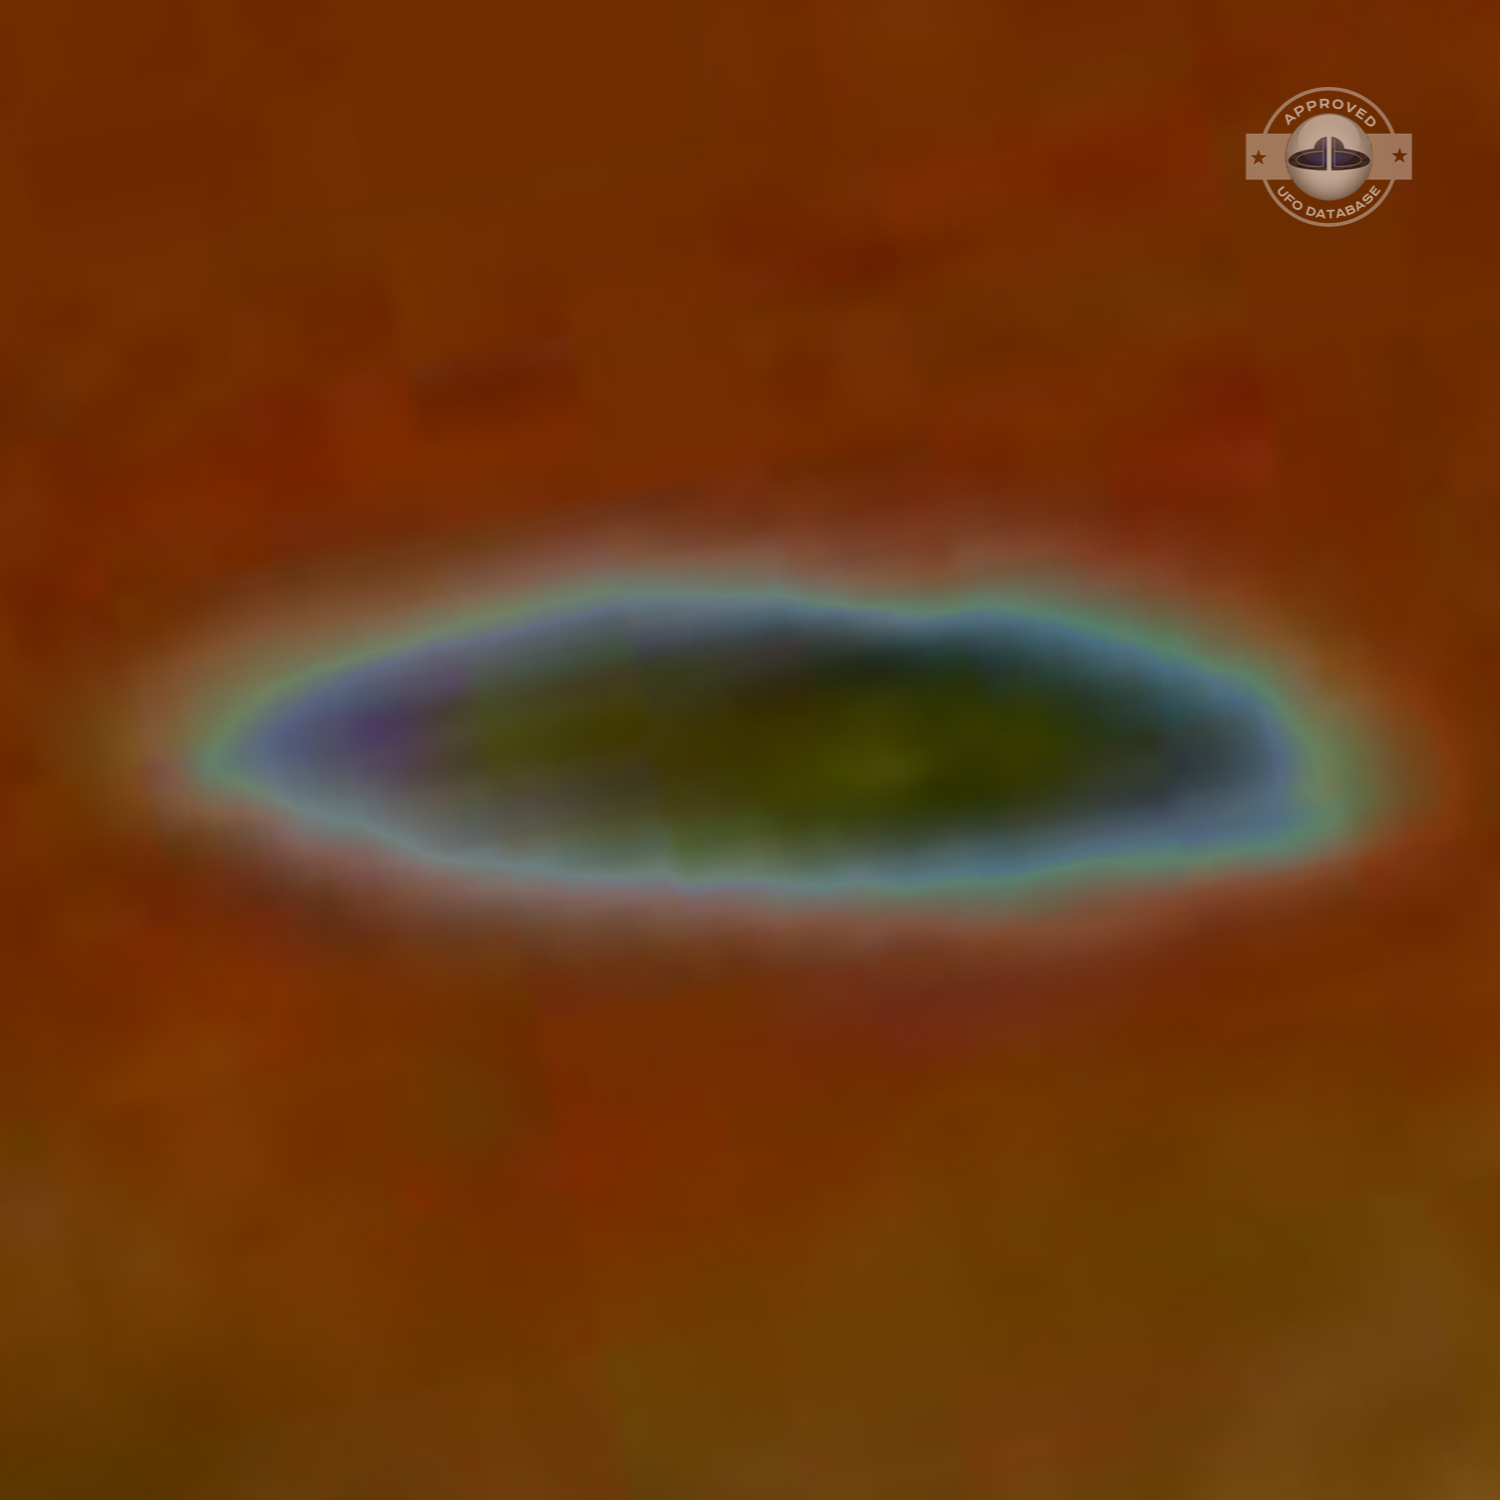 UFO picture taken on october 21, 2004 over the Kaneohe Bay in Hawaii UFO Picture #13-7